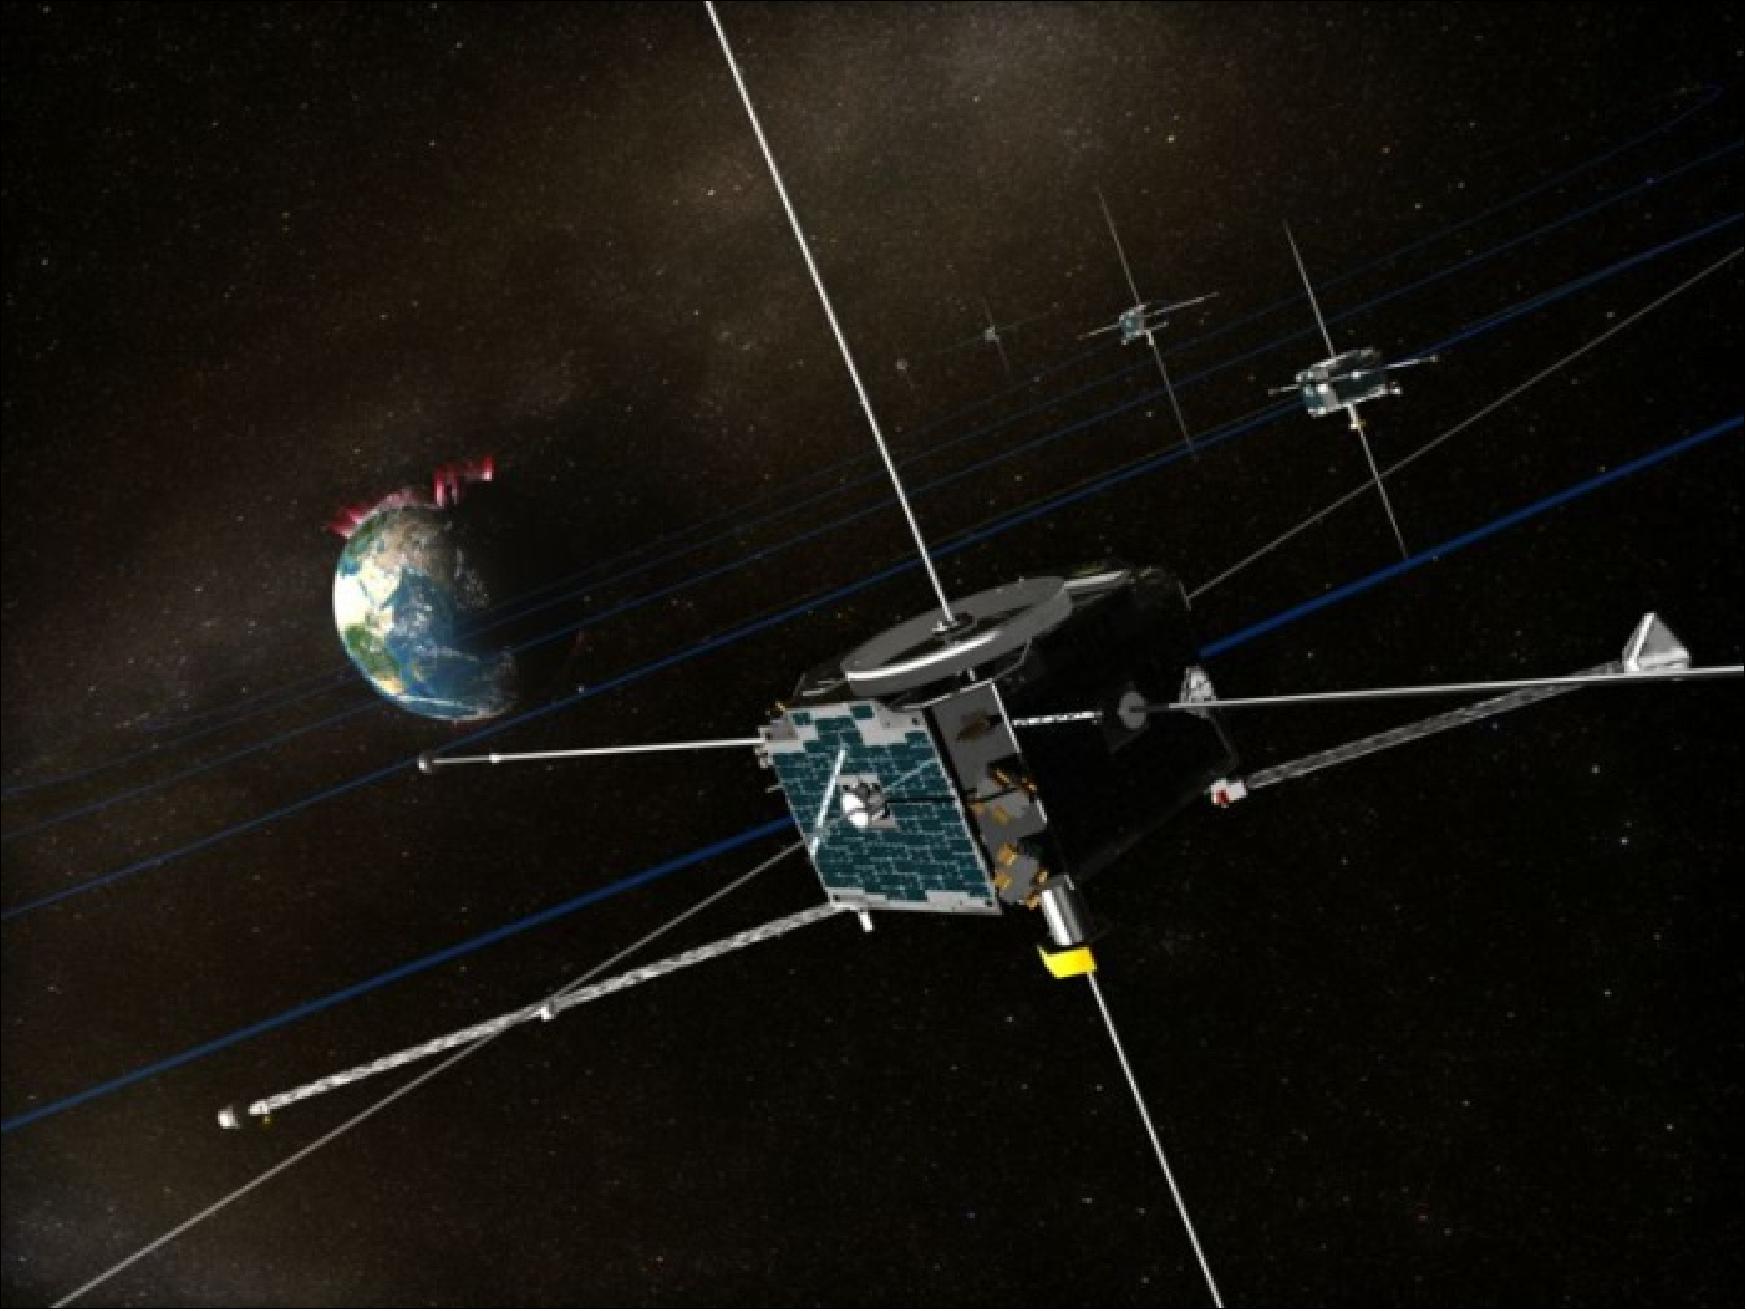 Figure 1: Artist's view of the THEMIS constellation in orbit (image credit: ATK Space)